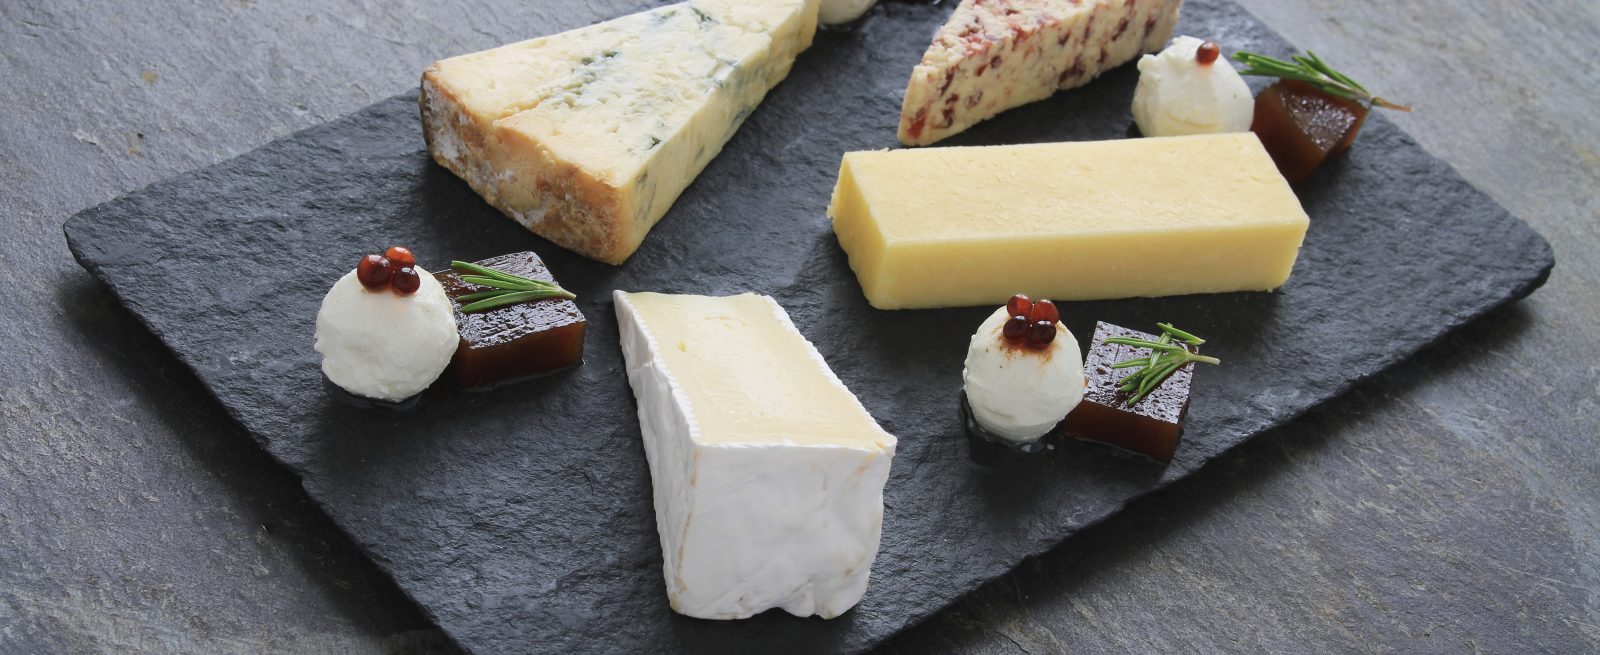 How To Add a Cheese Board to Your Summer Menu